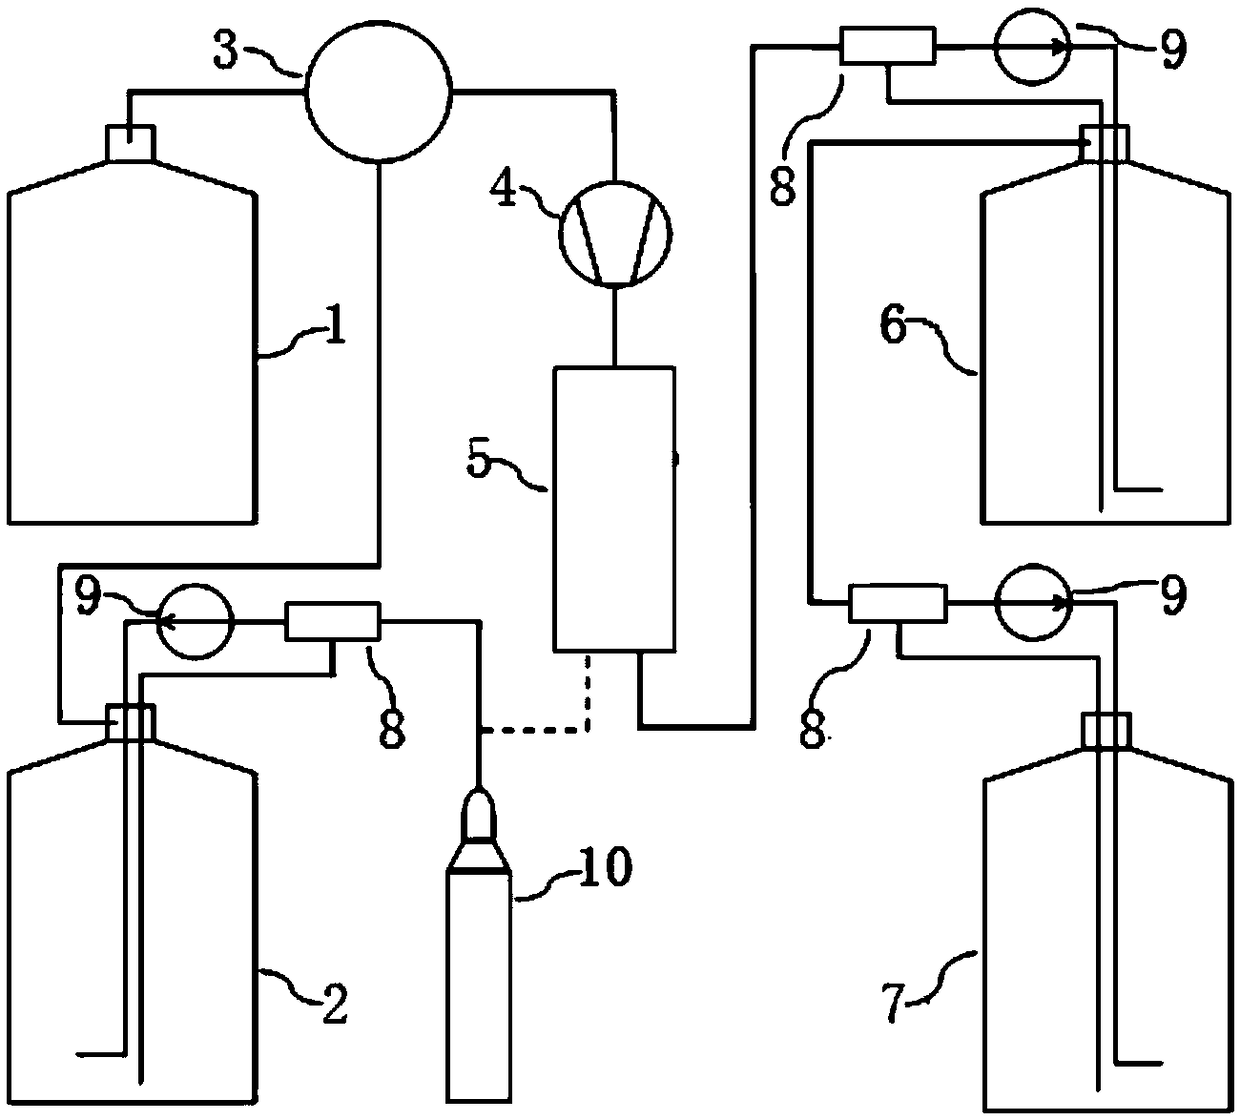 Method and system for collecting aromatic substances and adding same to wine during fermentation